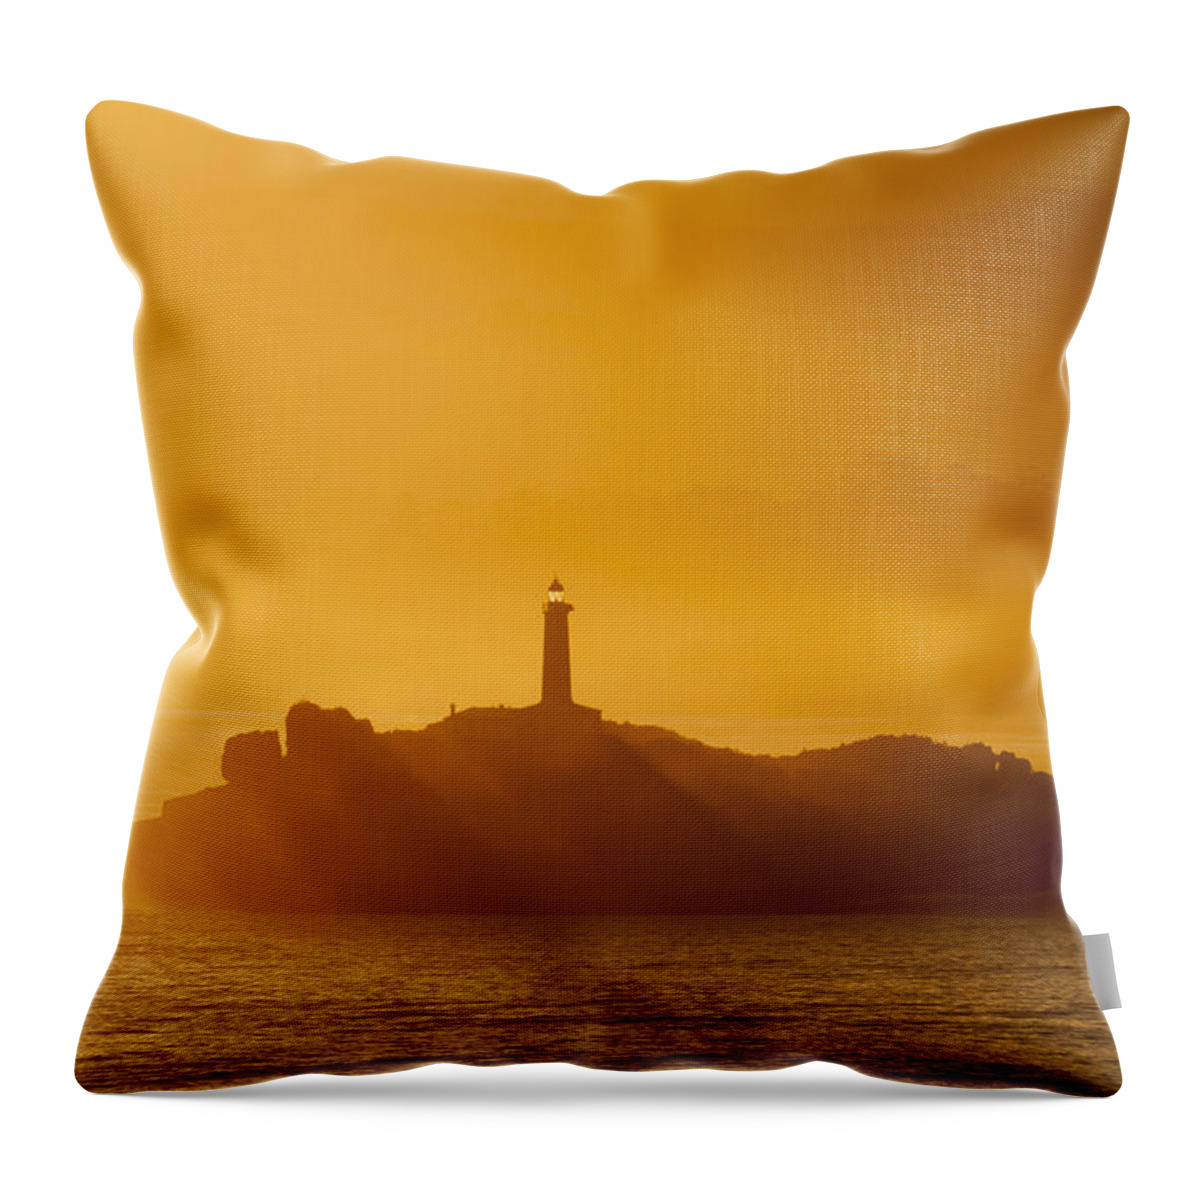 Sunrise Throw Pillow featuring the photograph Sunbathing by Santi Carral